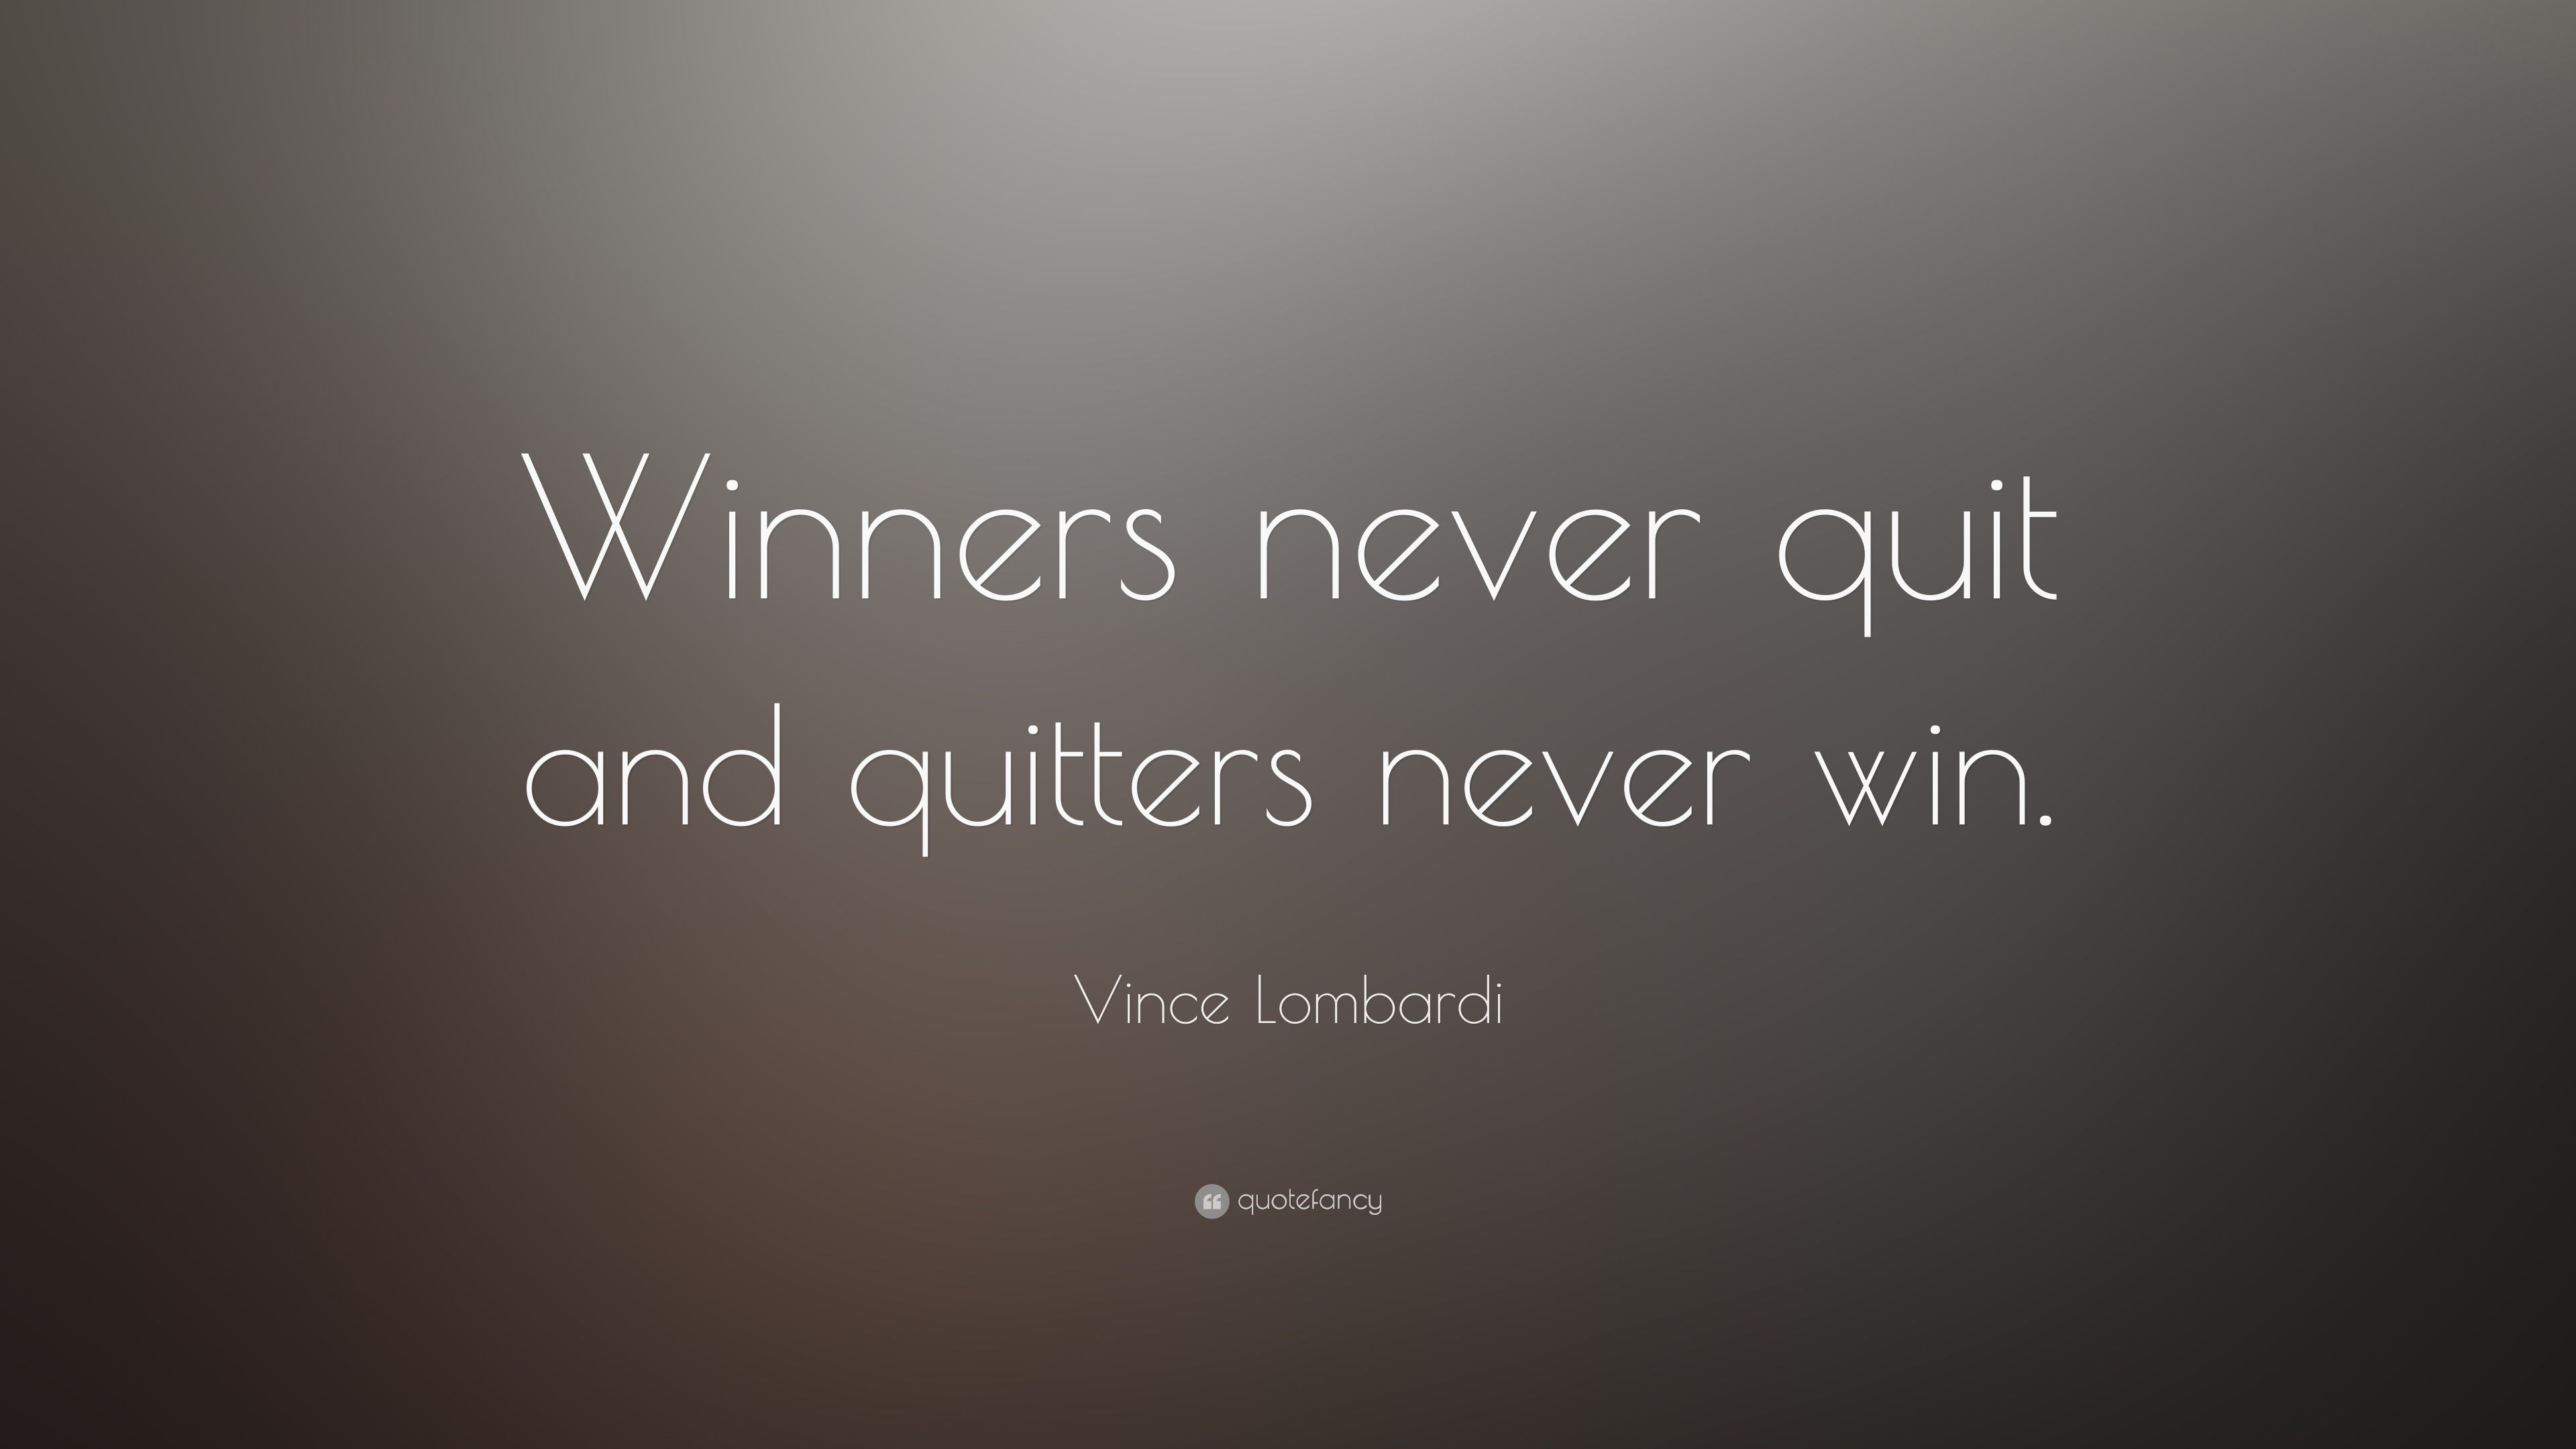 Vince Lombardi Quote: “Winners never quit and quitters never win.” (25 wallpaper)